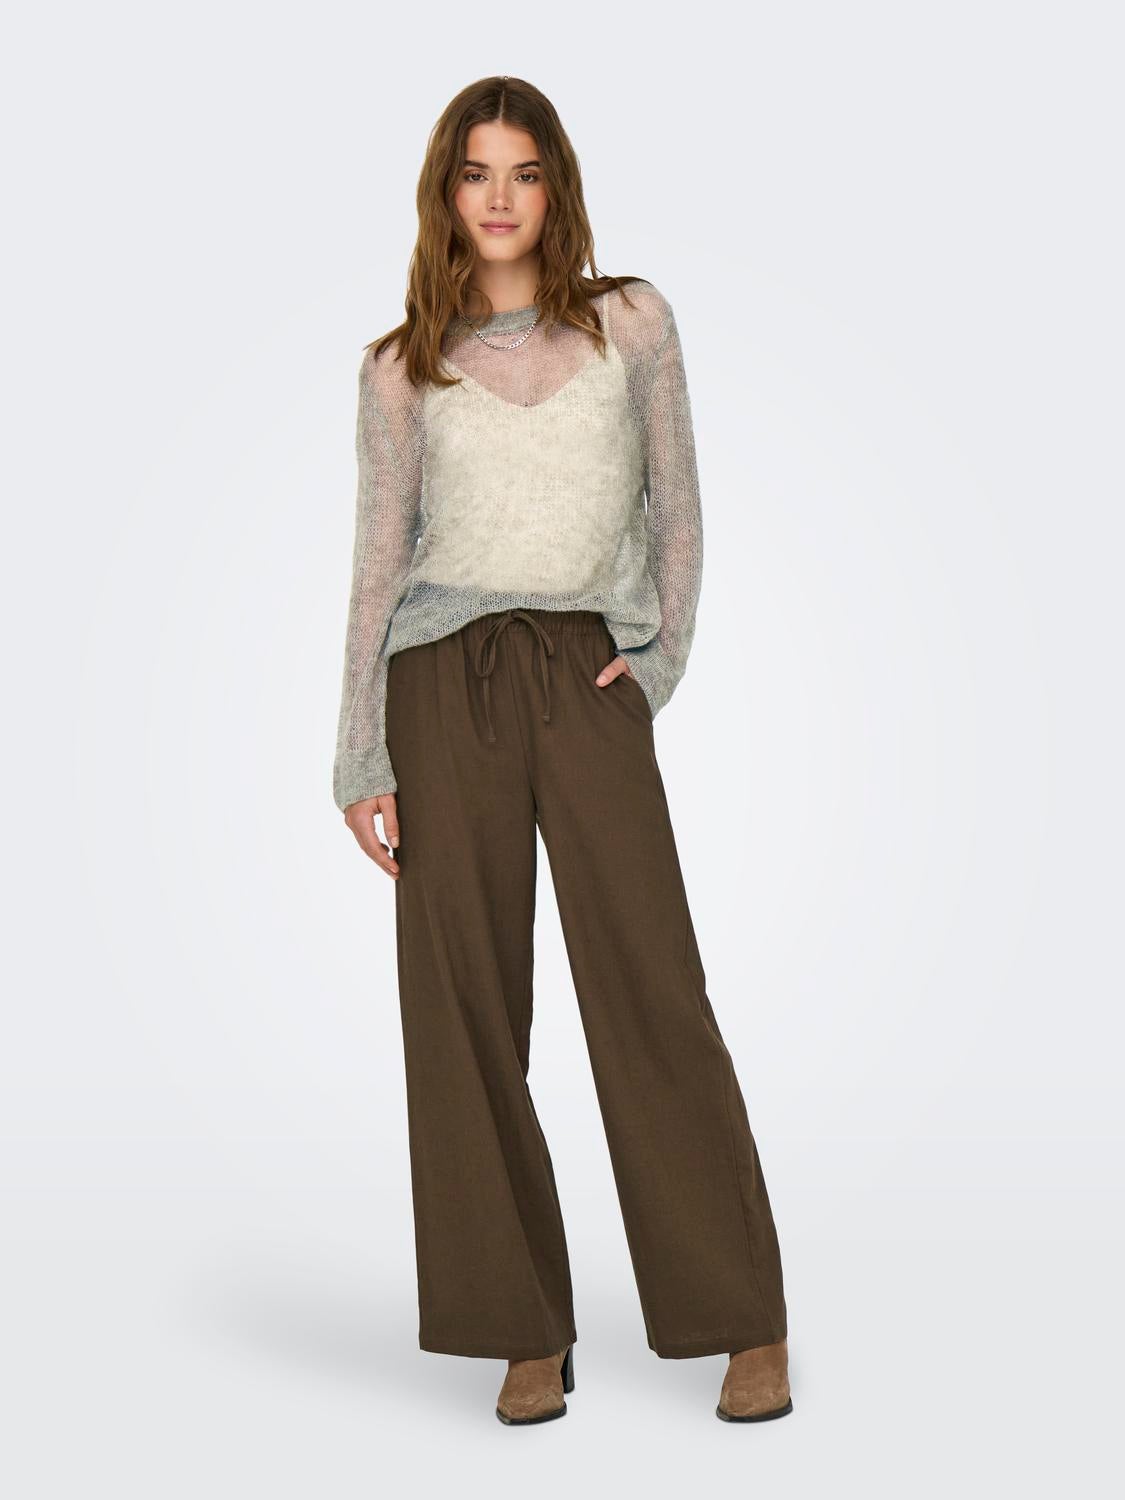 Classic trousers with high waist